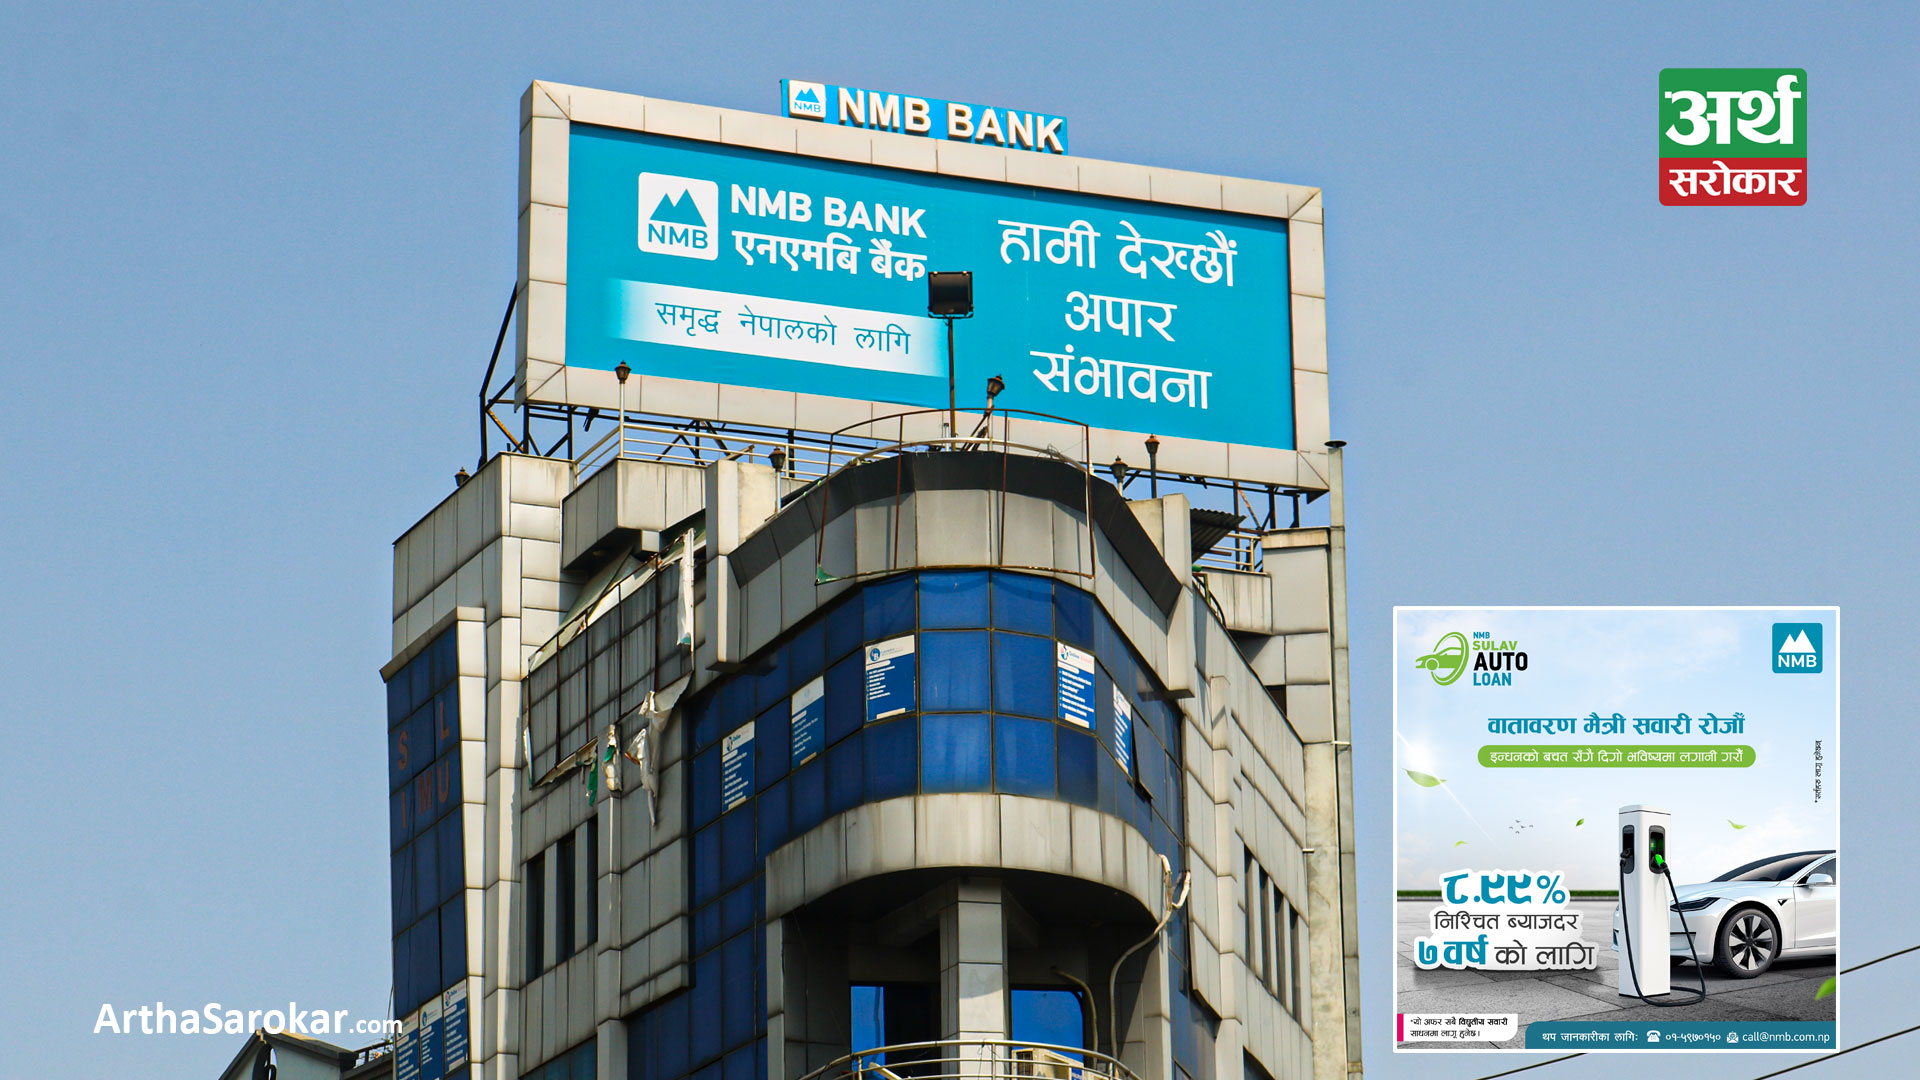 NMB Bank’s Electric Vehicle Auto Loan at just 8.99% for 7 years